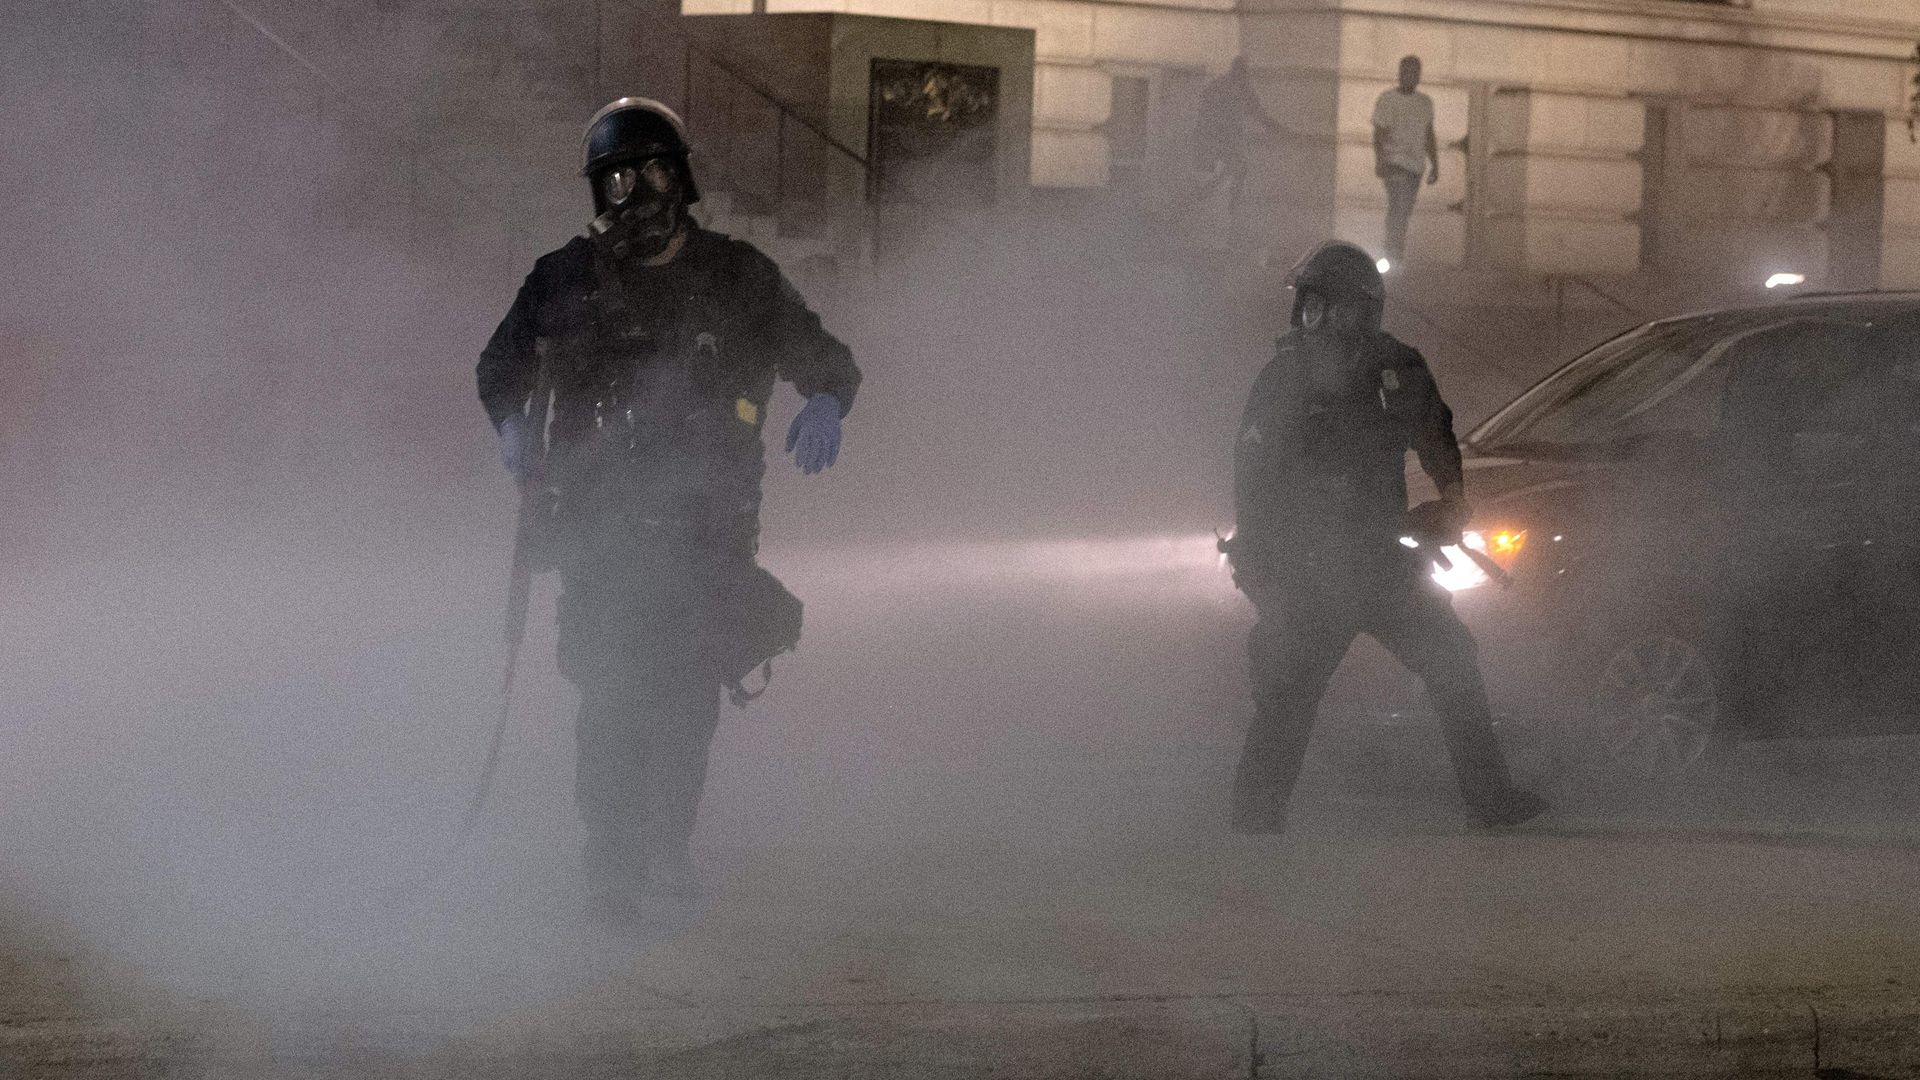 A Detroit Police officer uses tear-gas on protesters during a demonstration in Detroit, Michigan late May 29